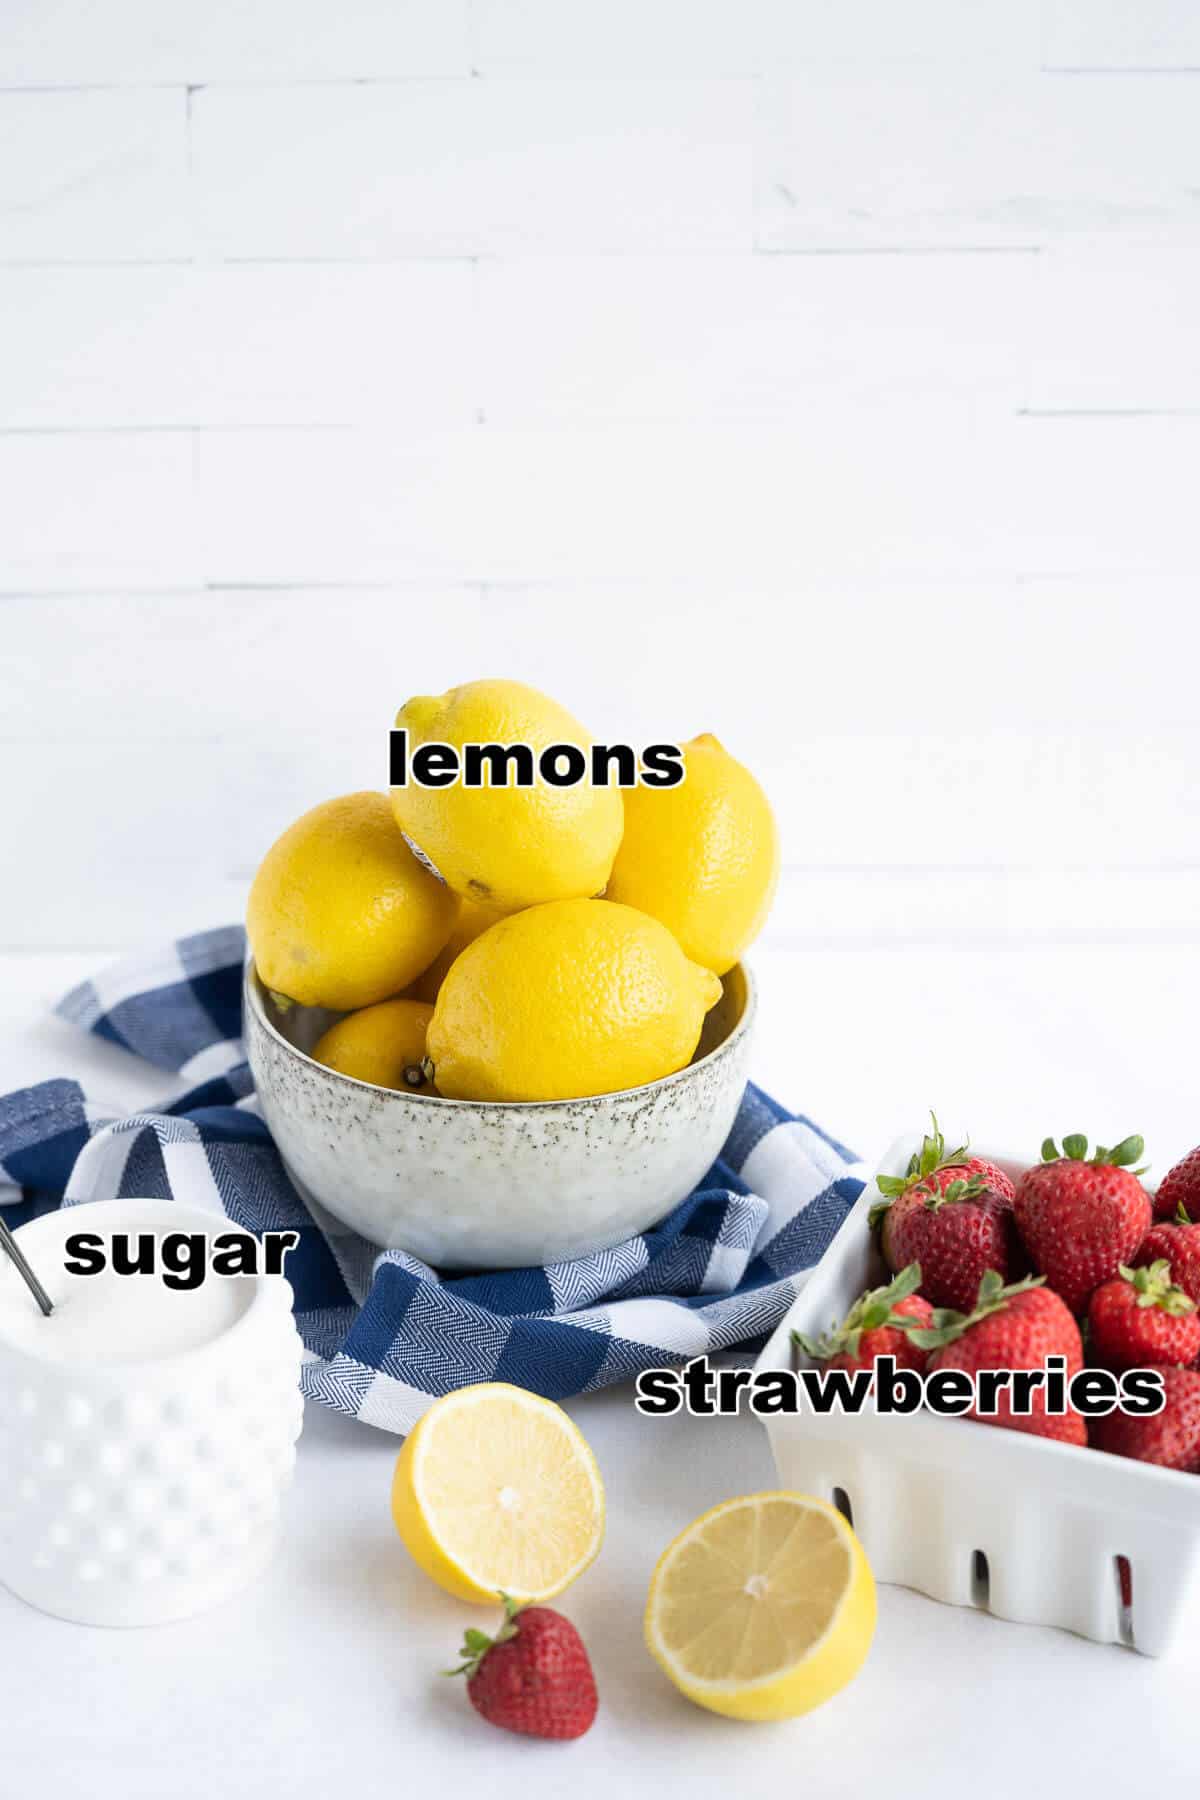 Bowl full of lemons sitting next to a container of sugar and a quart of fresh strawberries.